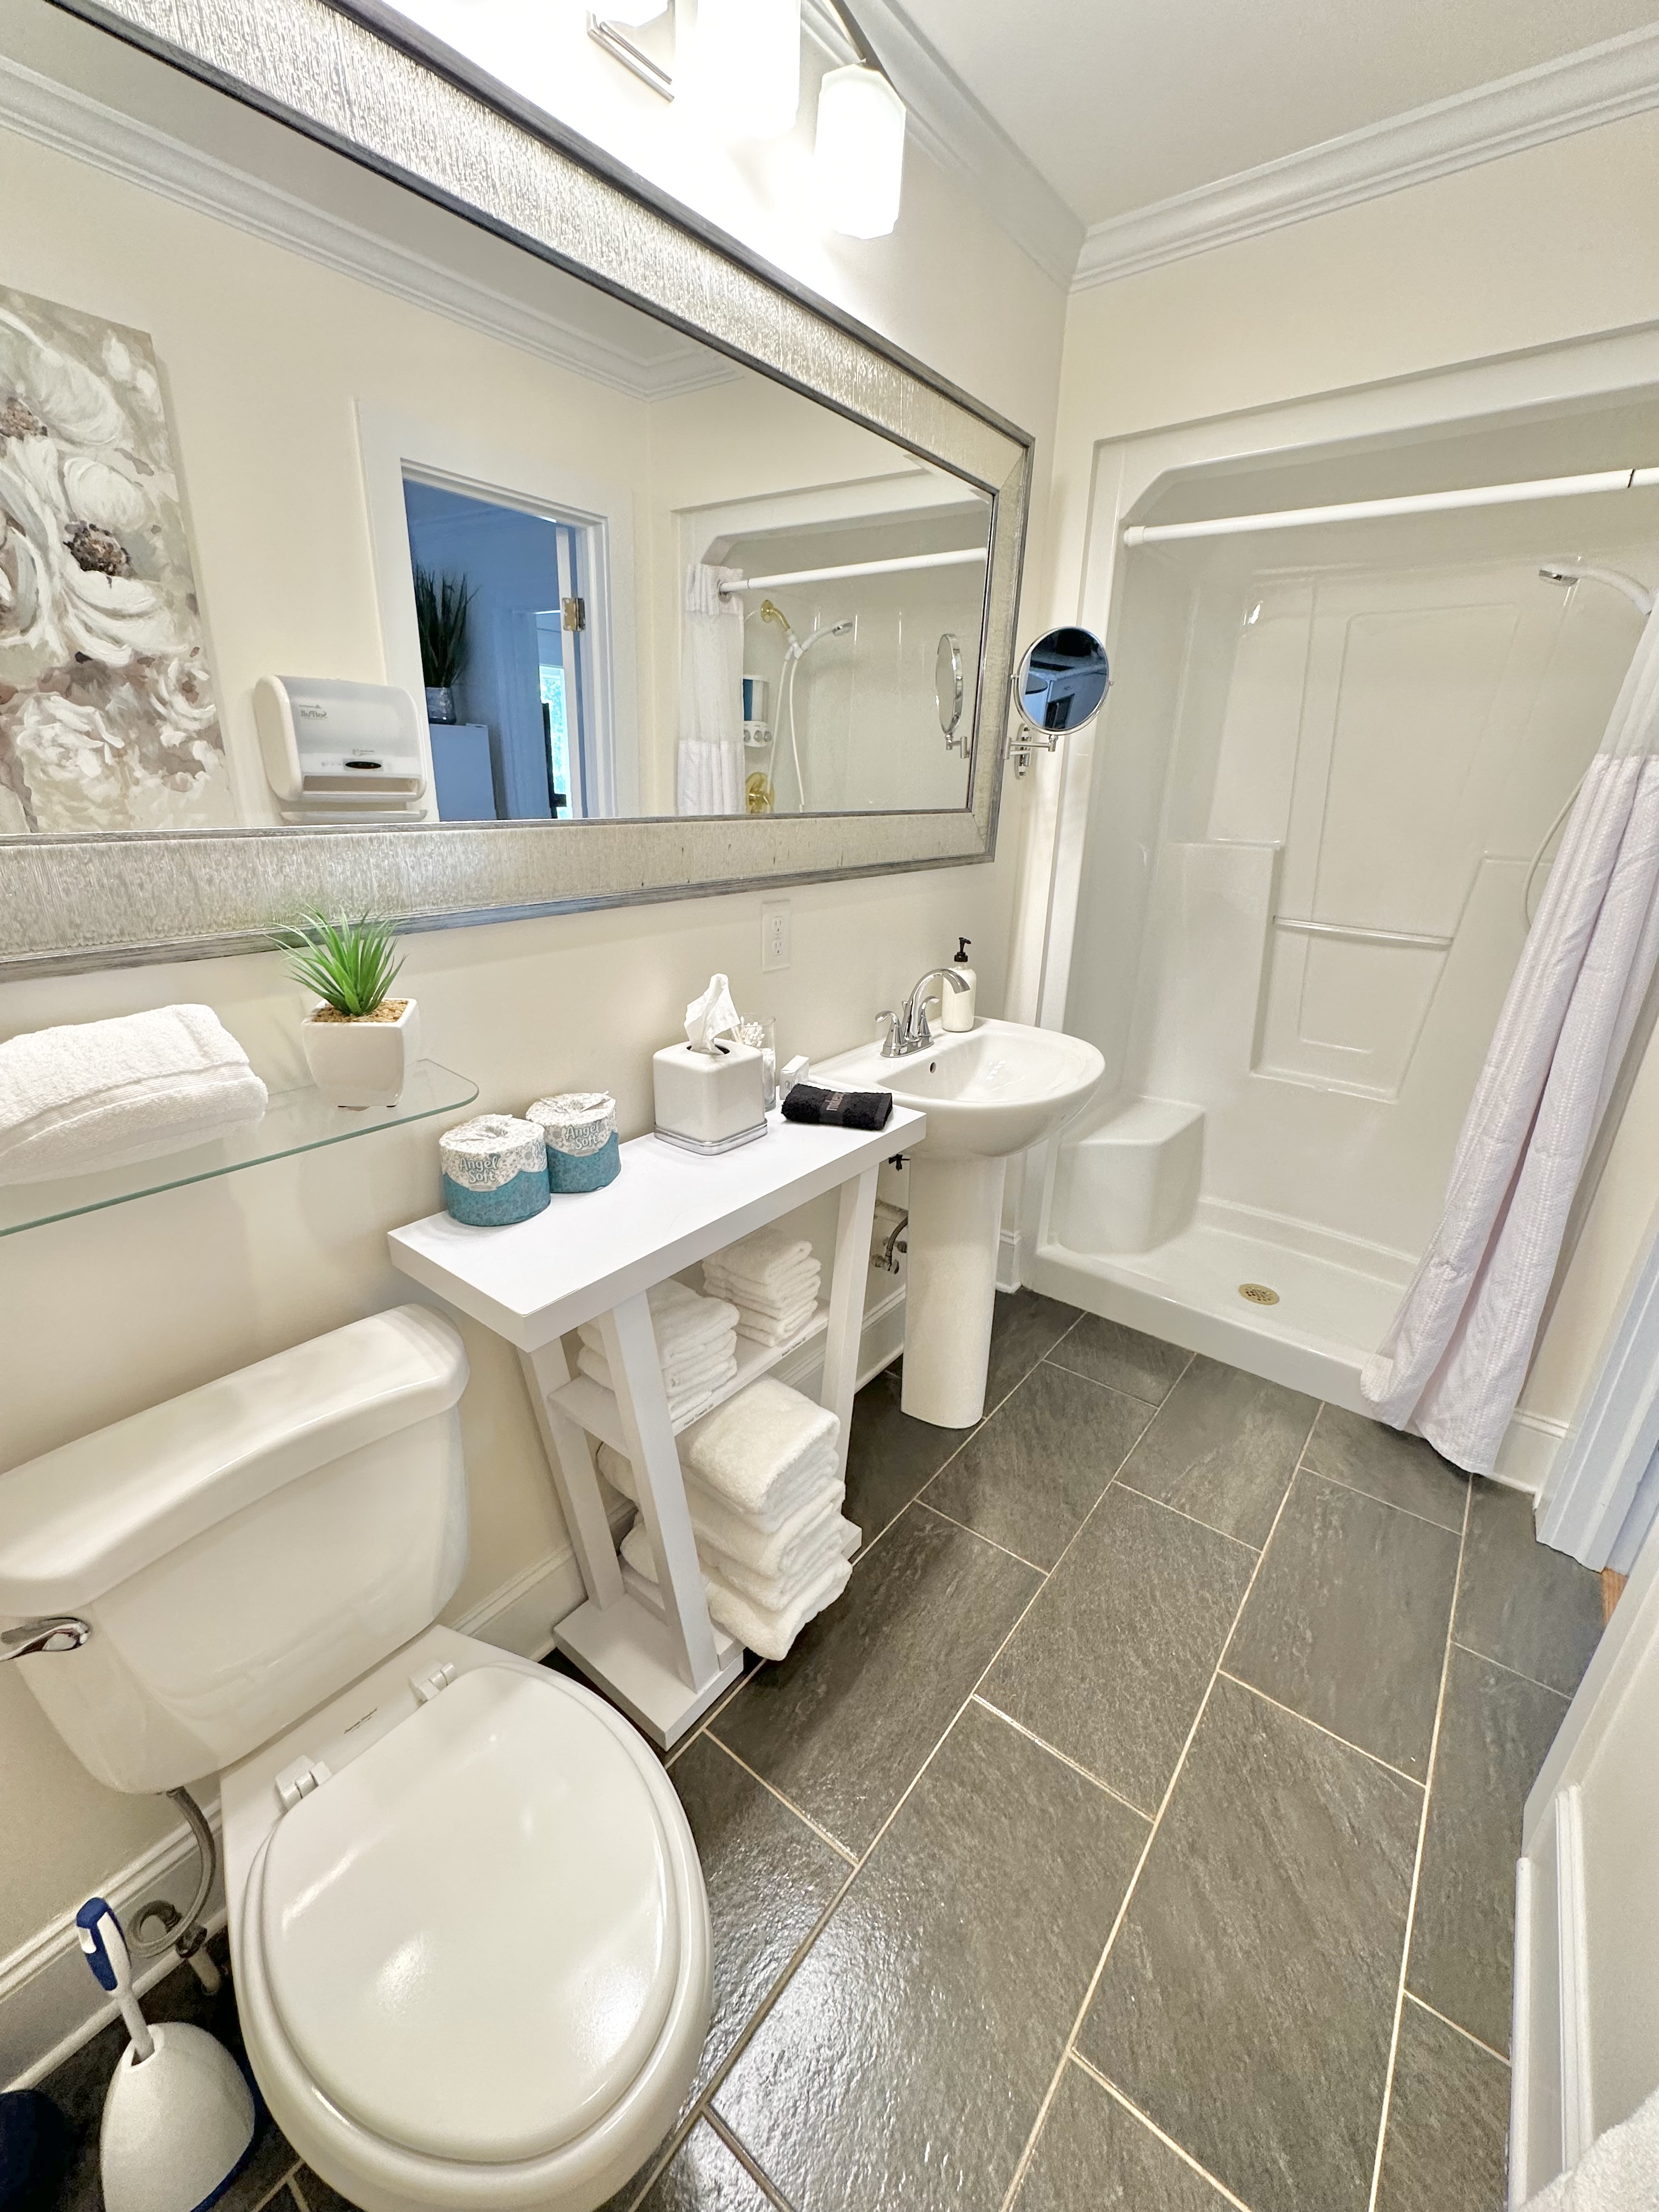 Magnolia Suite Bath-Upper Level. Shampoo, conditioner, & body wash are provided. This is right off of the double queen room & upstairs kitchenette.